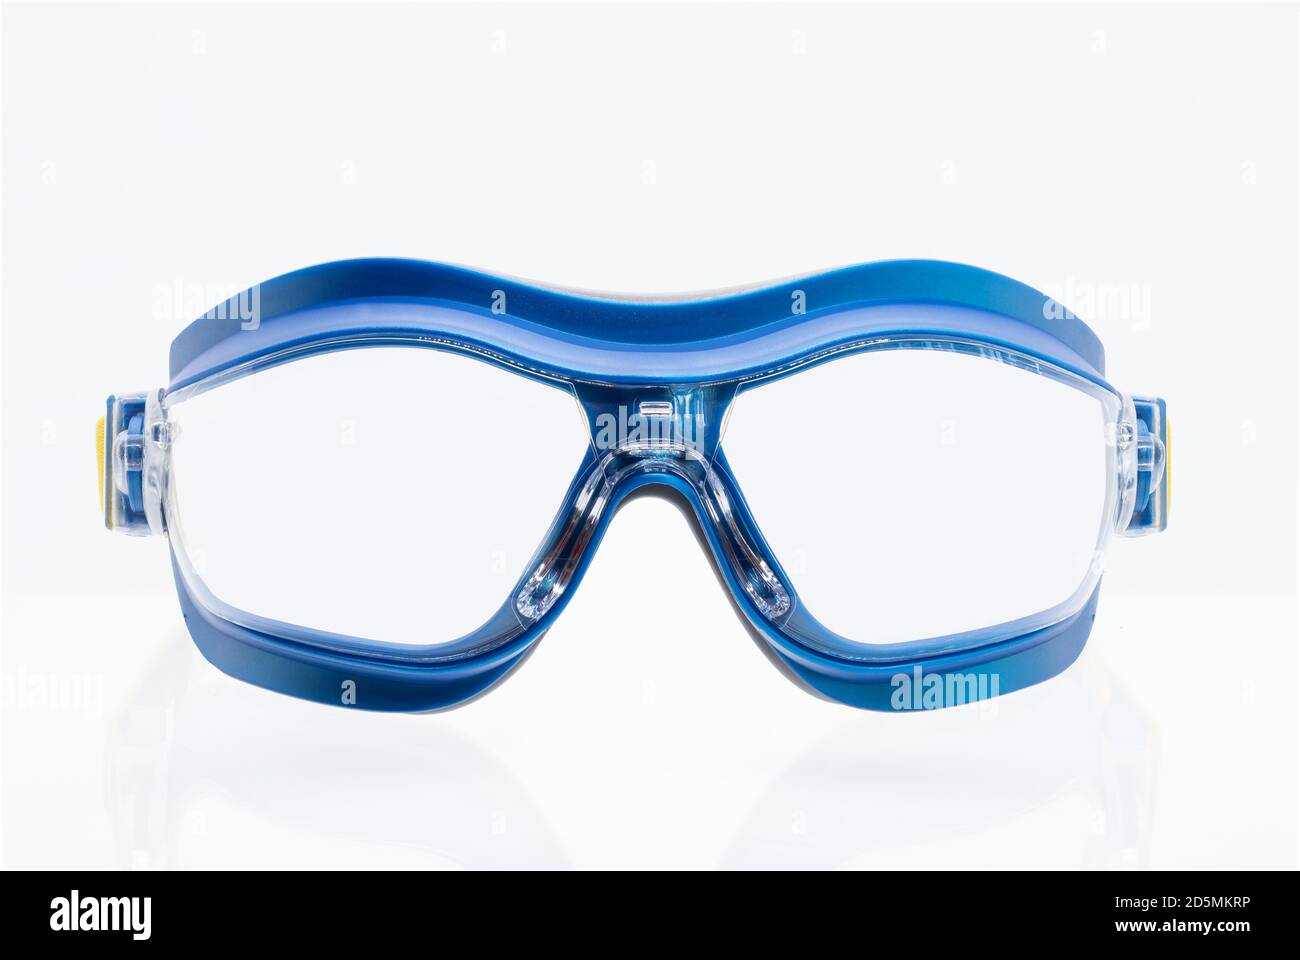 Safety glasses Dual lens clear anti-fogging glasses for mechanical hazards. Mount comprehensive Stock Photo